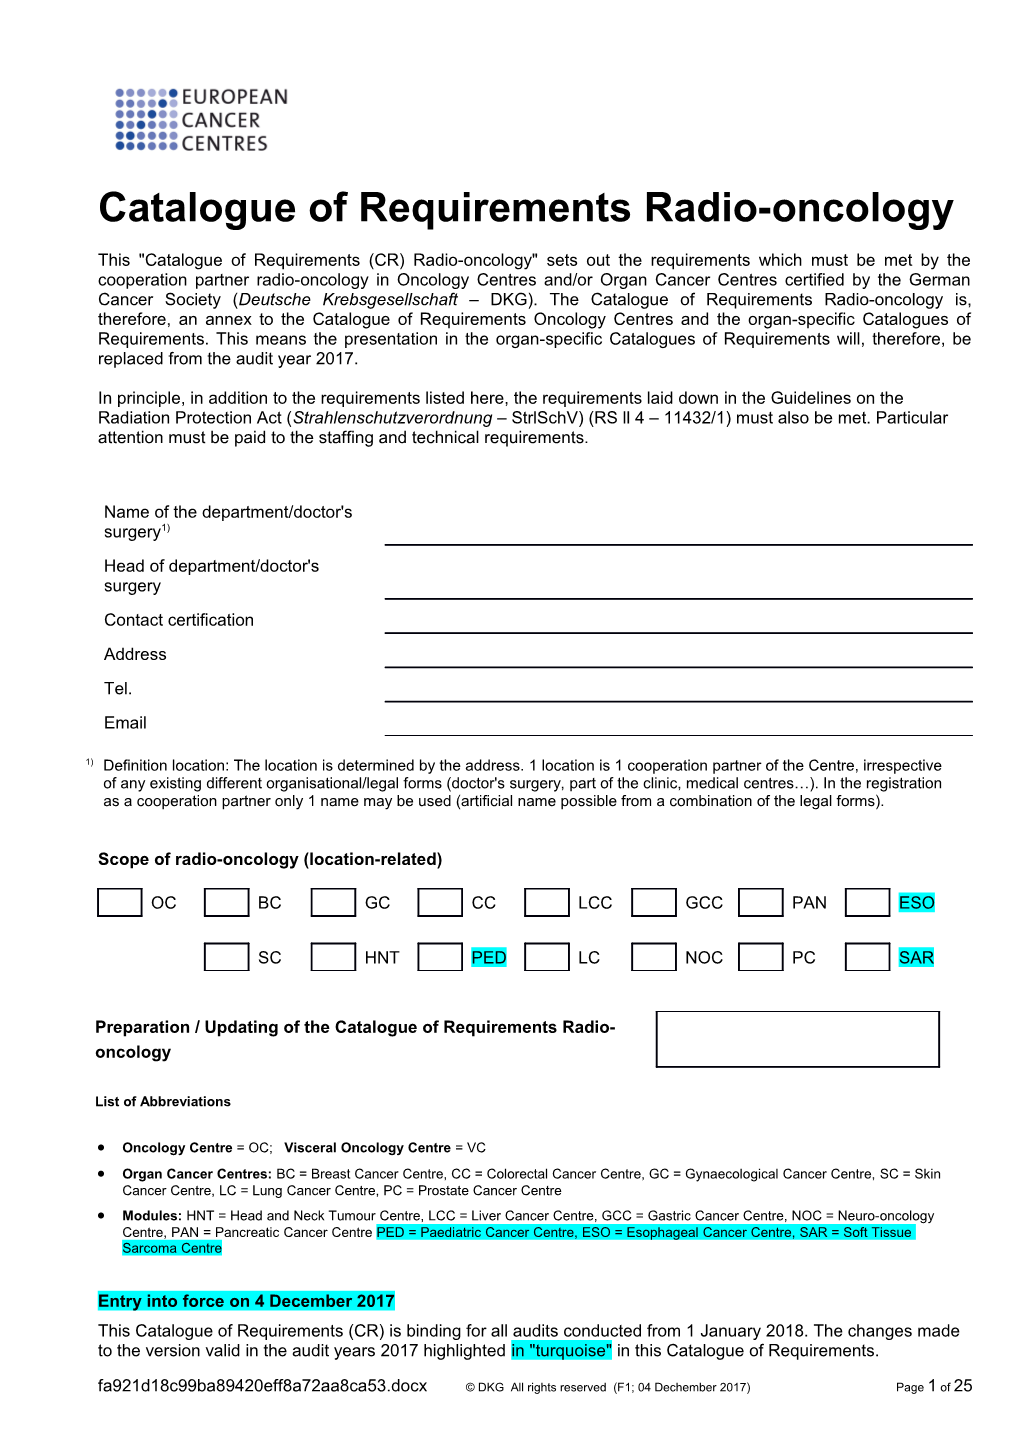 Catalogue of Requirements Radio-Oncology